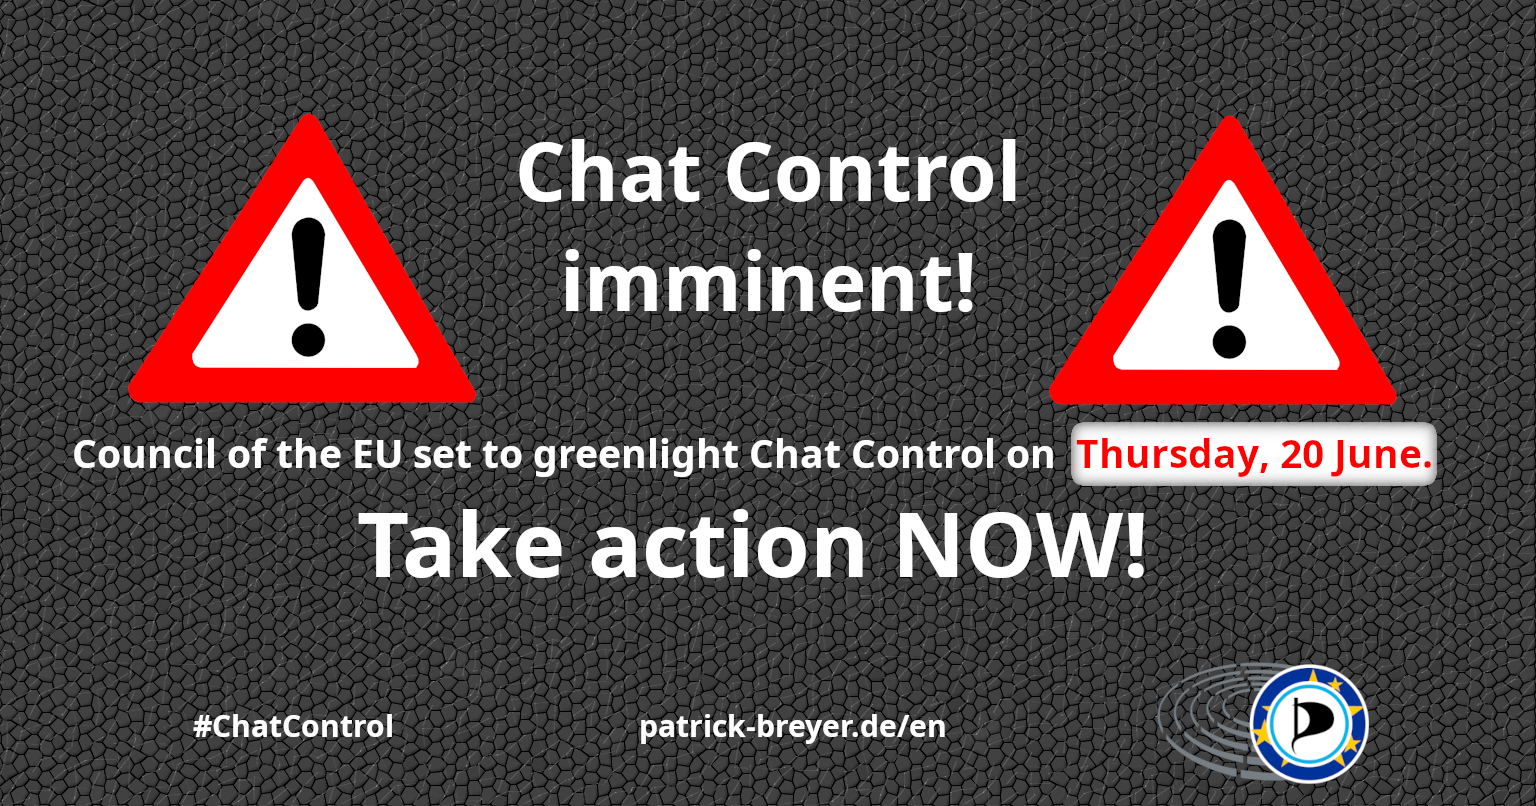 Warning signs and text: "Chat Control imminent! Council of the EU set to greenlight Chat Control on Thursday, 20 June. Take action NOW! #ChatControl, patrick-breyer.de/en" and the logo of the European Pirates